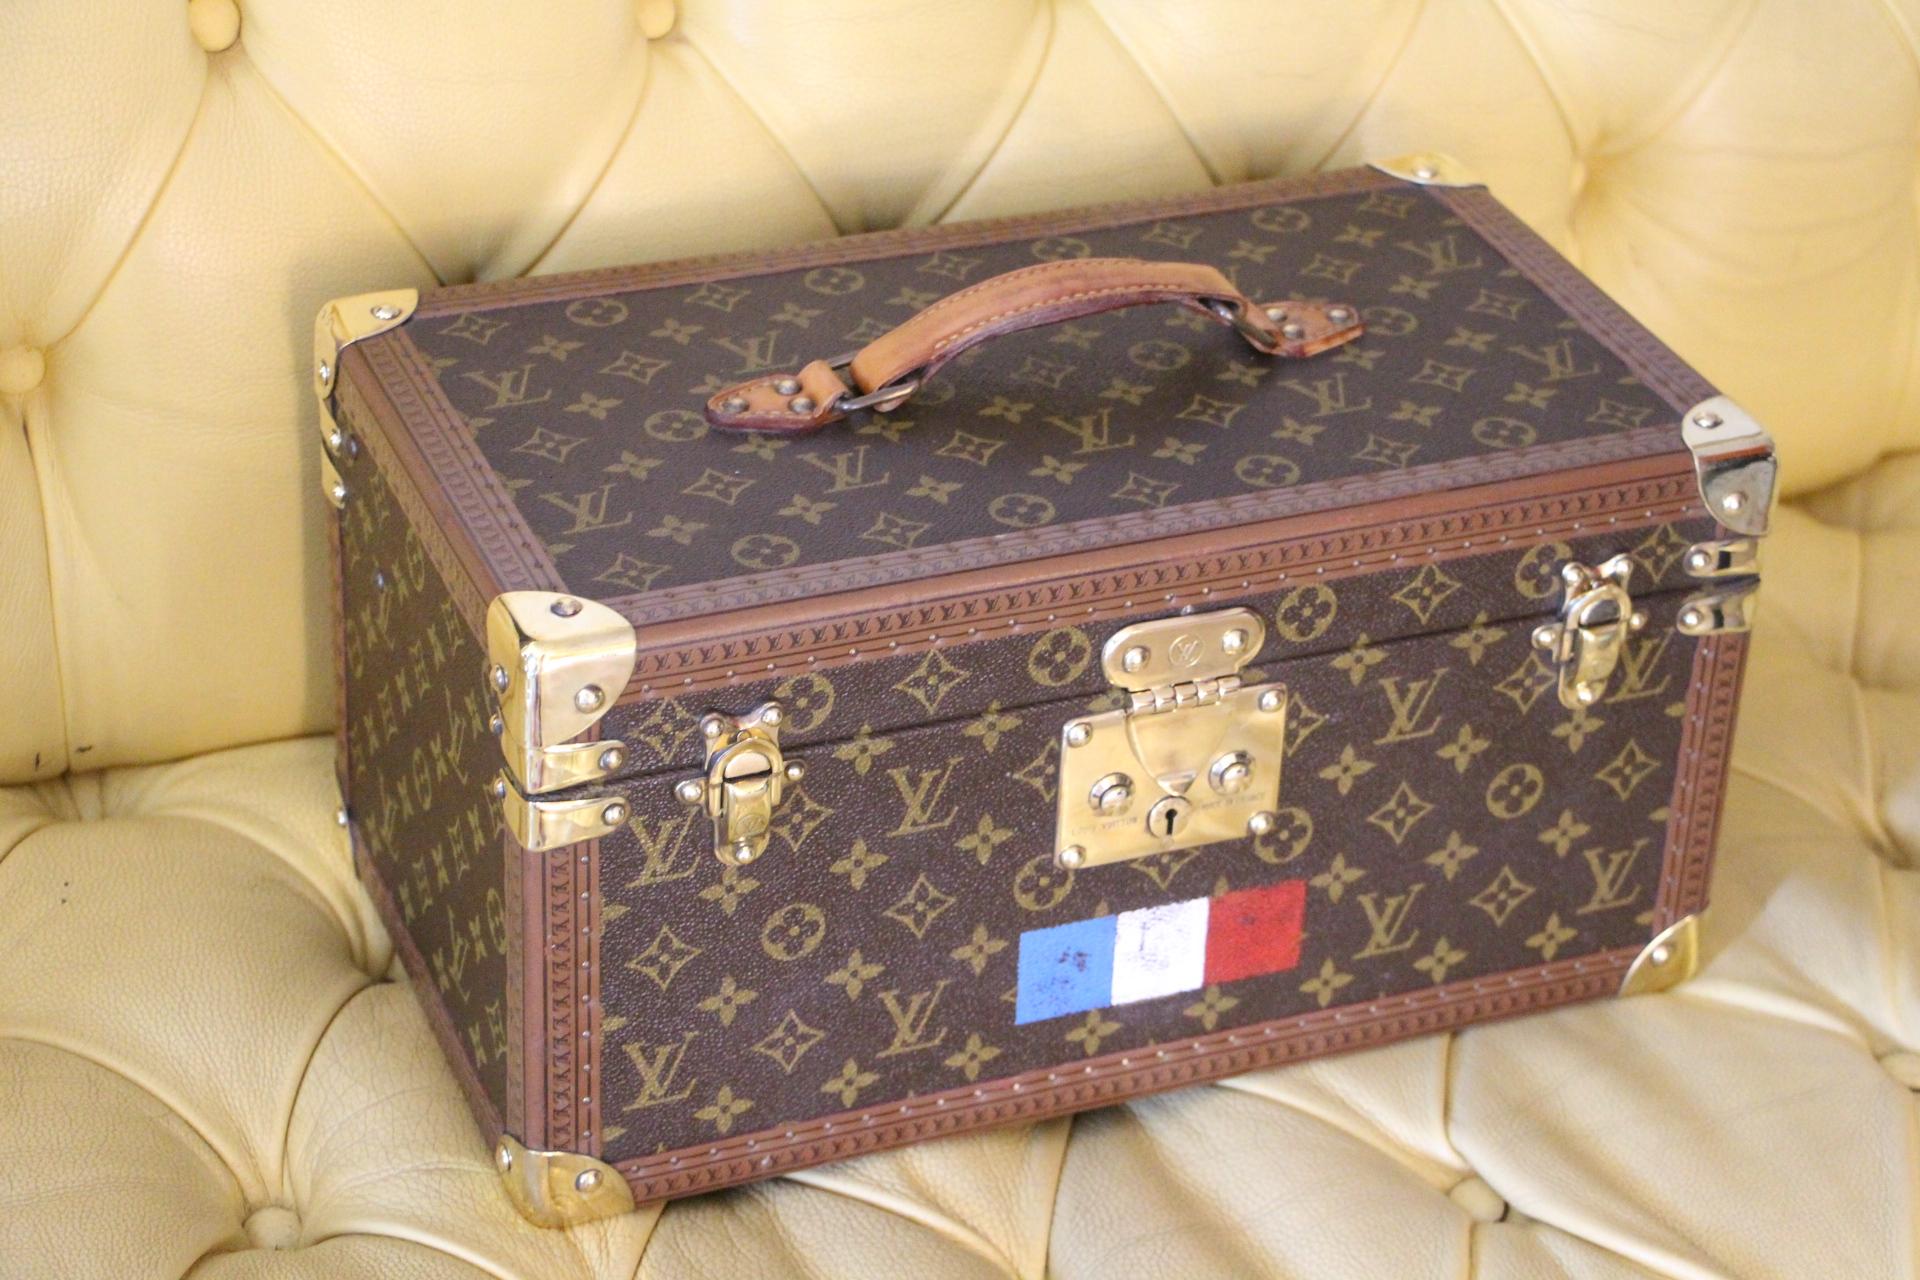 This Louis Vuitton beauty case features monogram canvas and all brass fittings.It also has got a customized hand painted French flag. It is very unique.
All studs are marked Louis Vuitton as well as its top leather handle.
Its interior is in beige